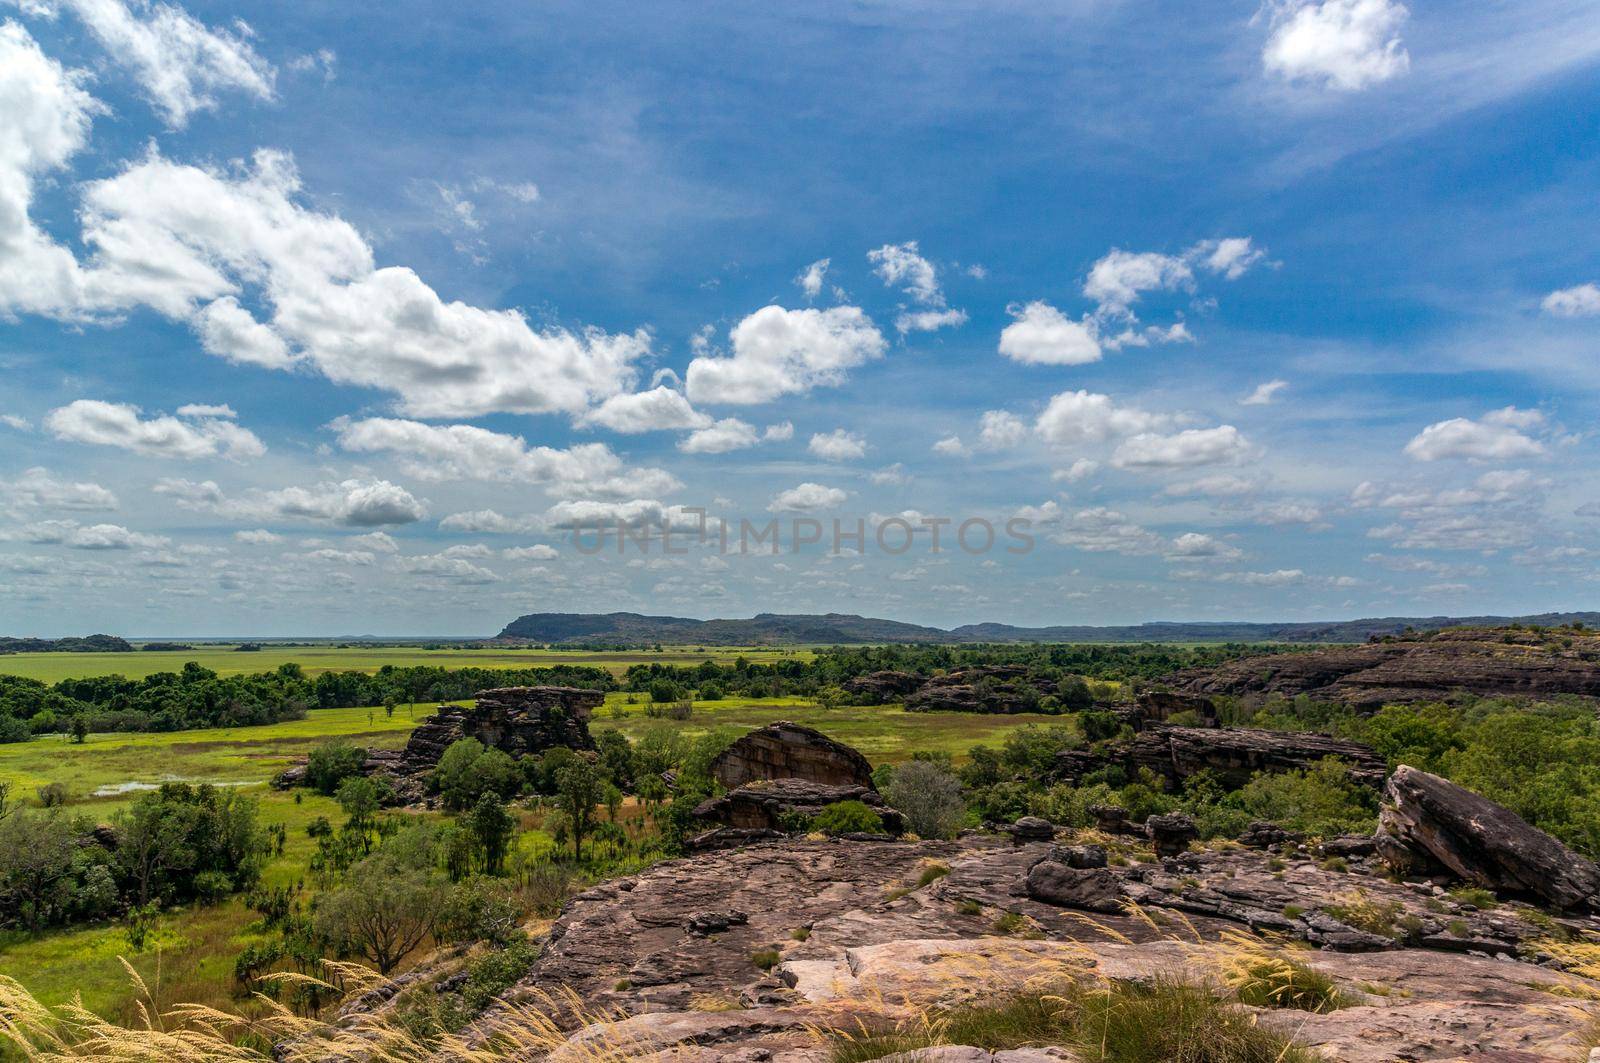 panorama from the Nadab Lookout in ubirr, kakadu national park - australia by bettercallcurry